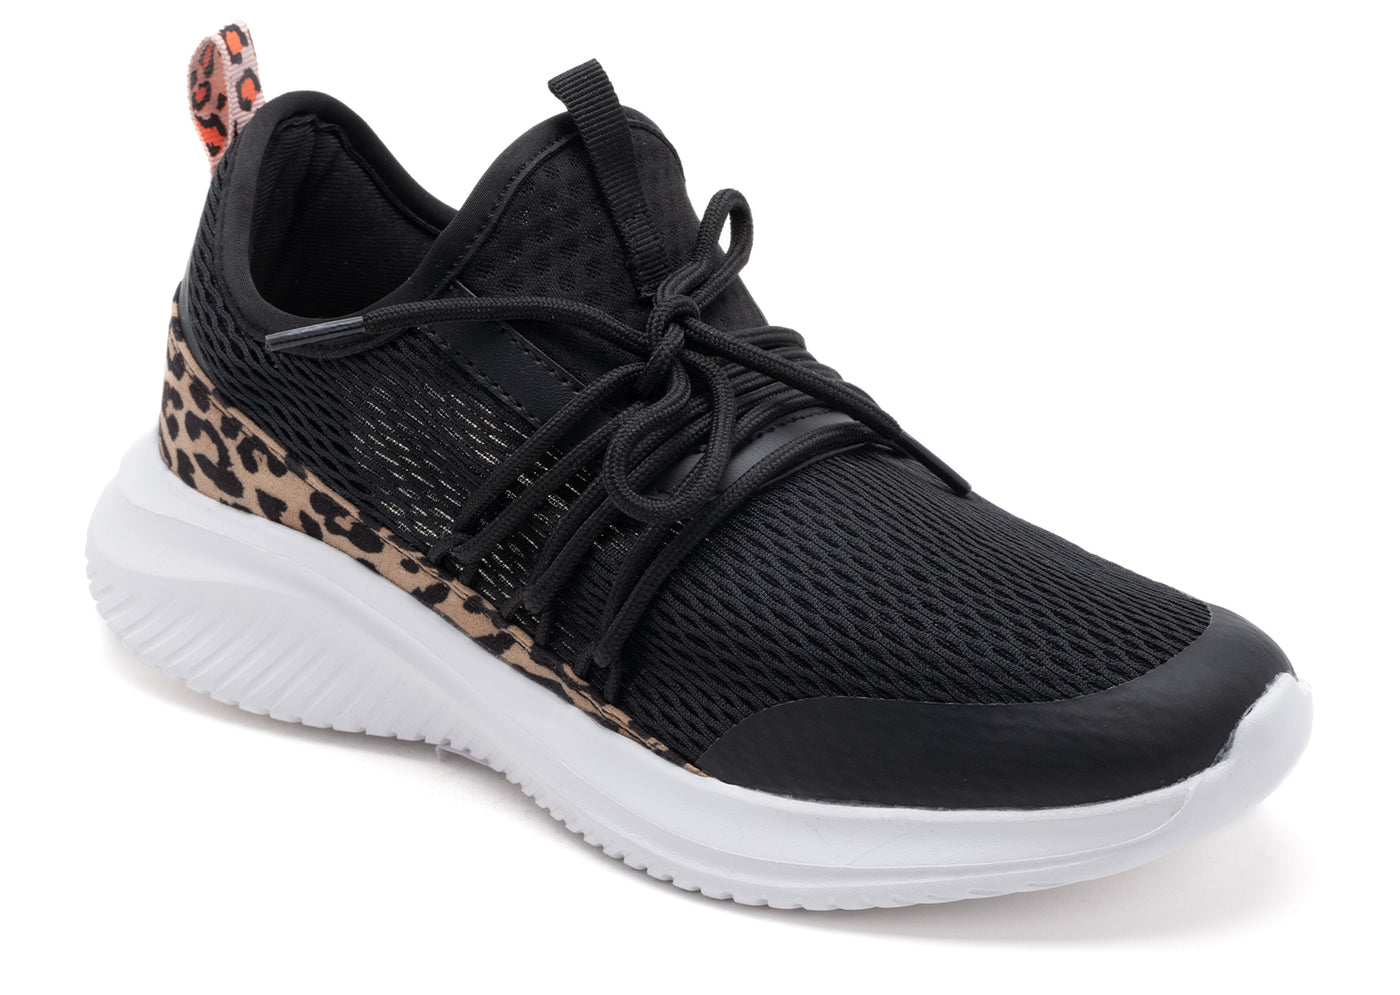 Corkys "Soft Serve" Sneaker in Leopard and Black